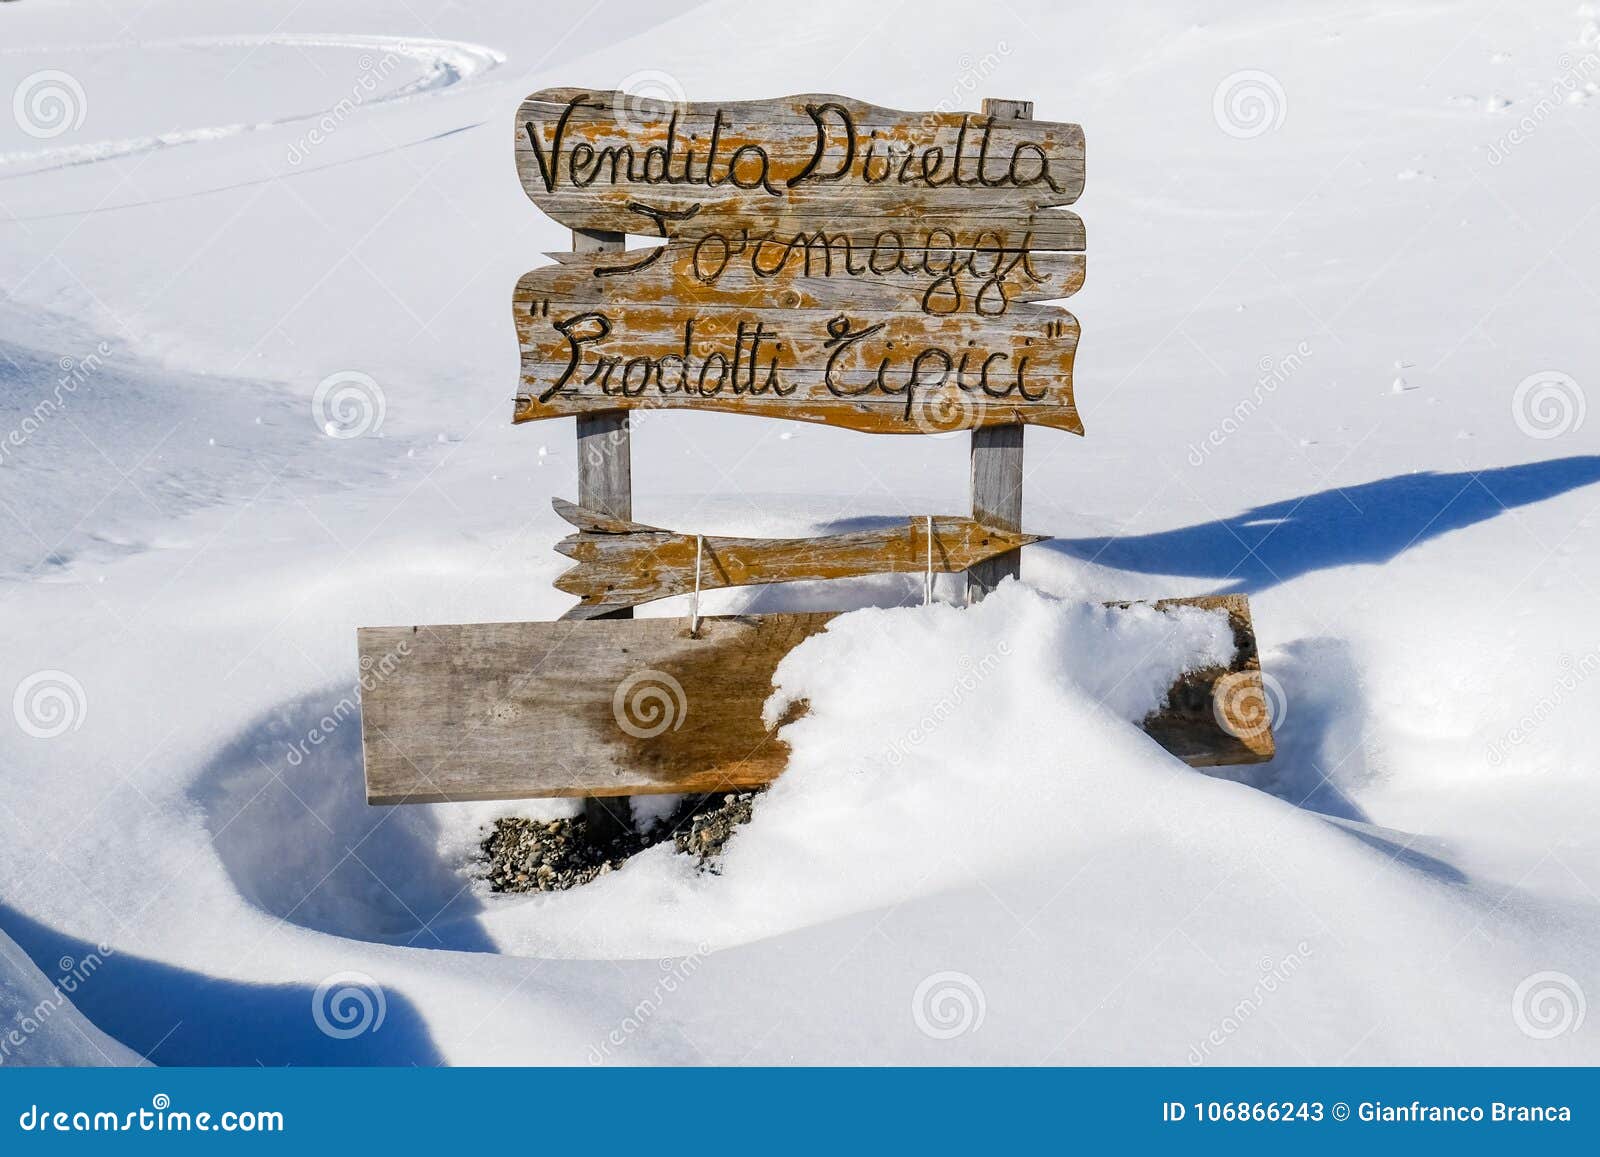 wooden sign on mountain